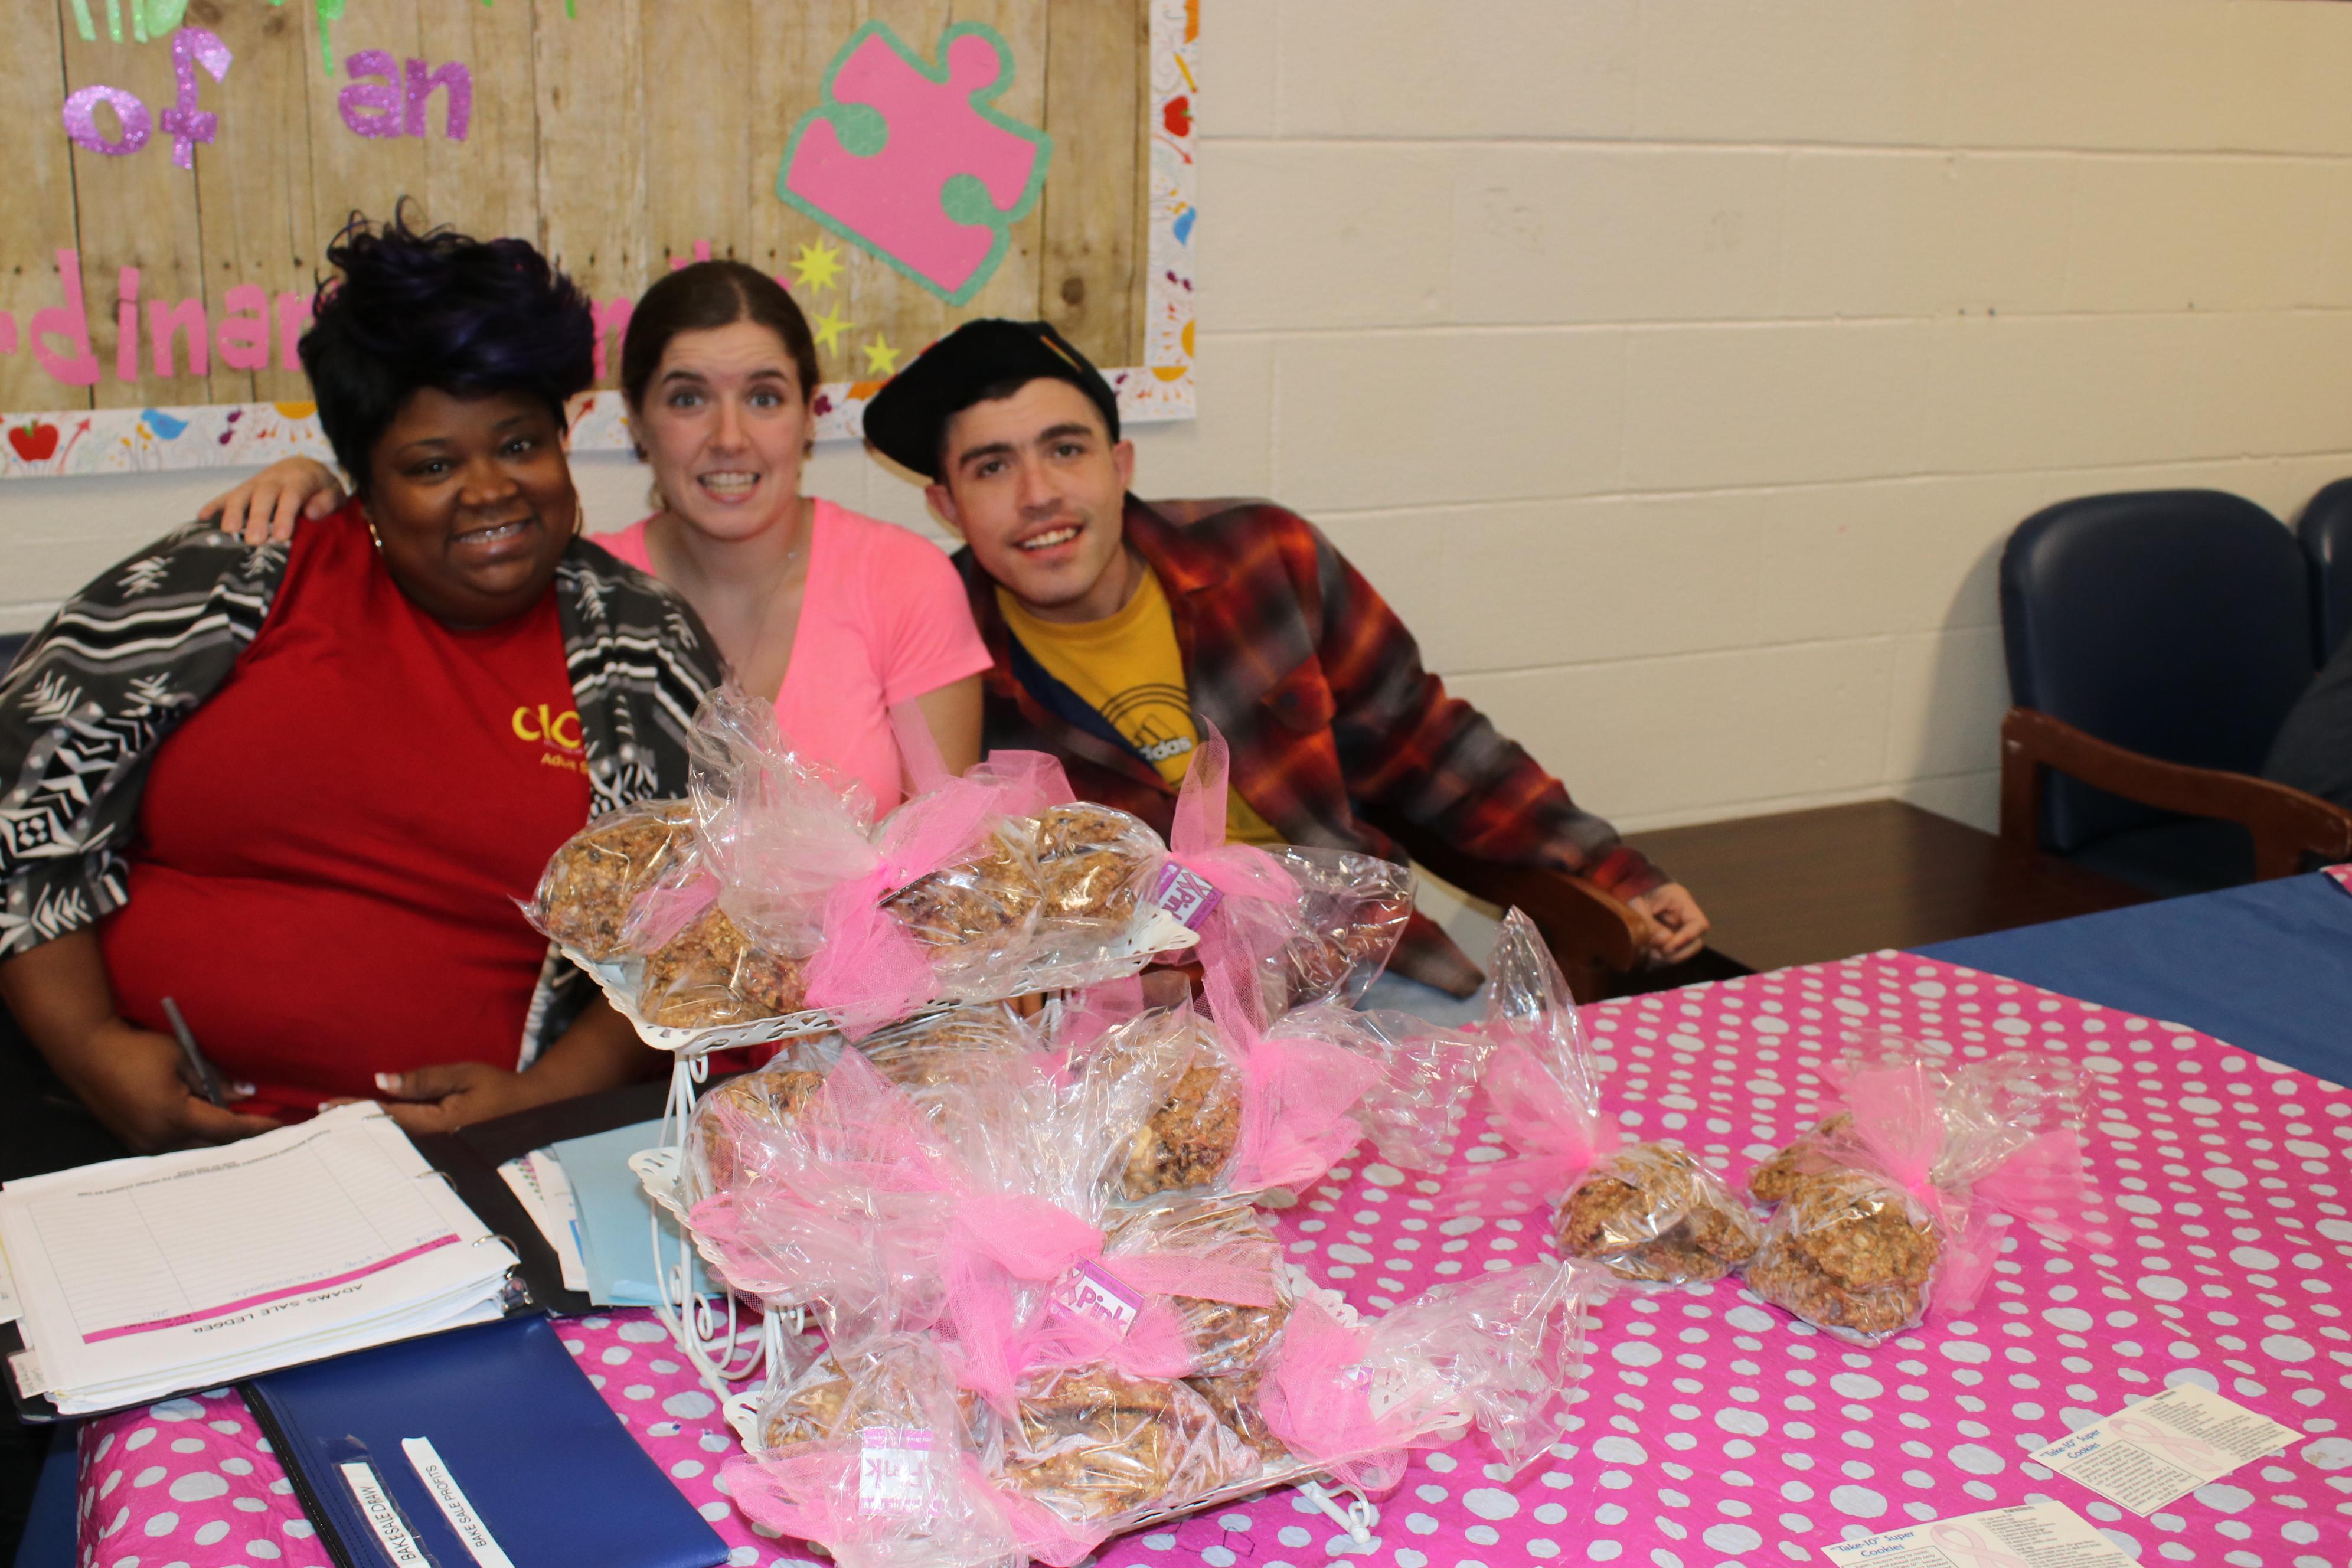 Group at breast cancer bake sale